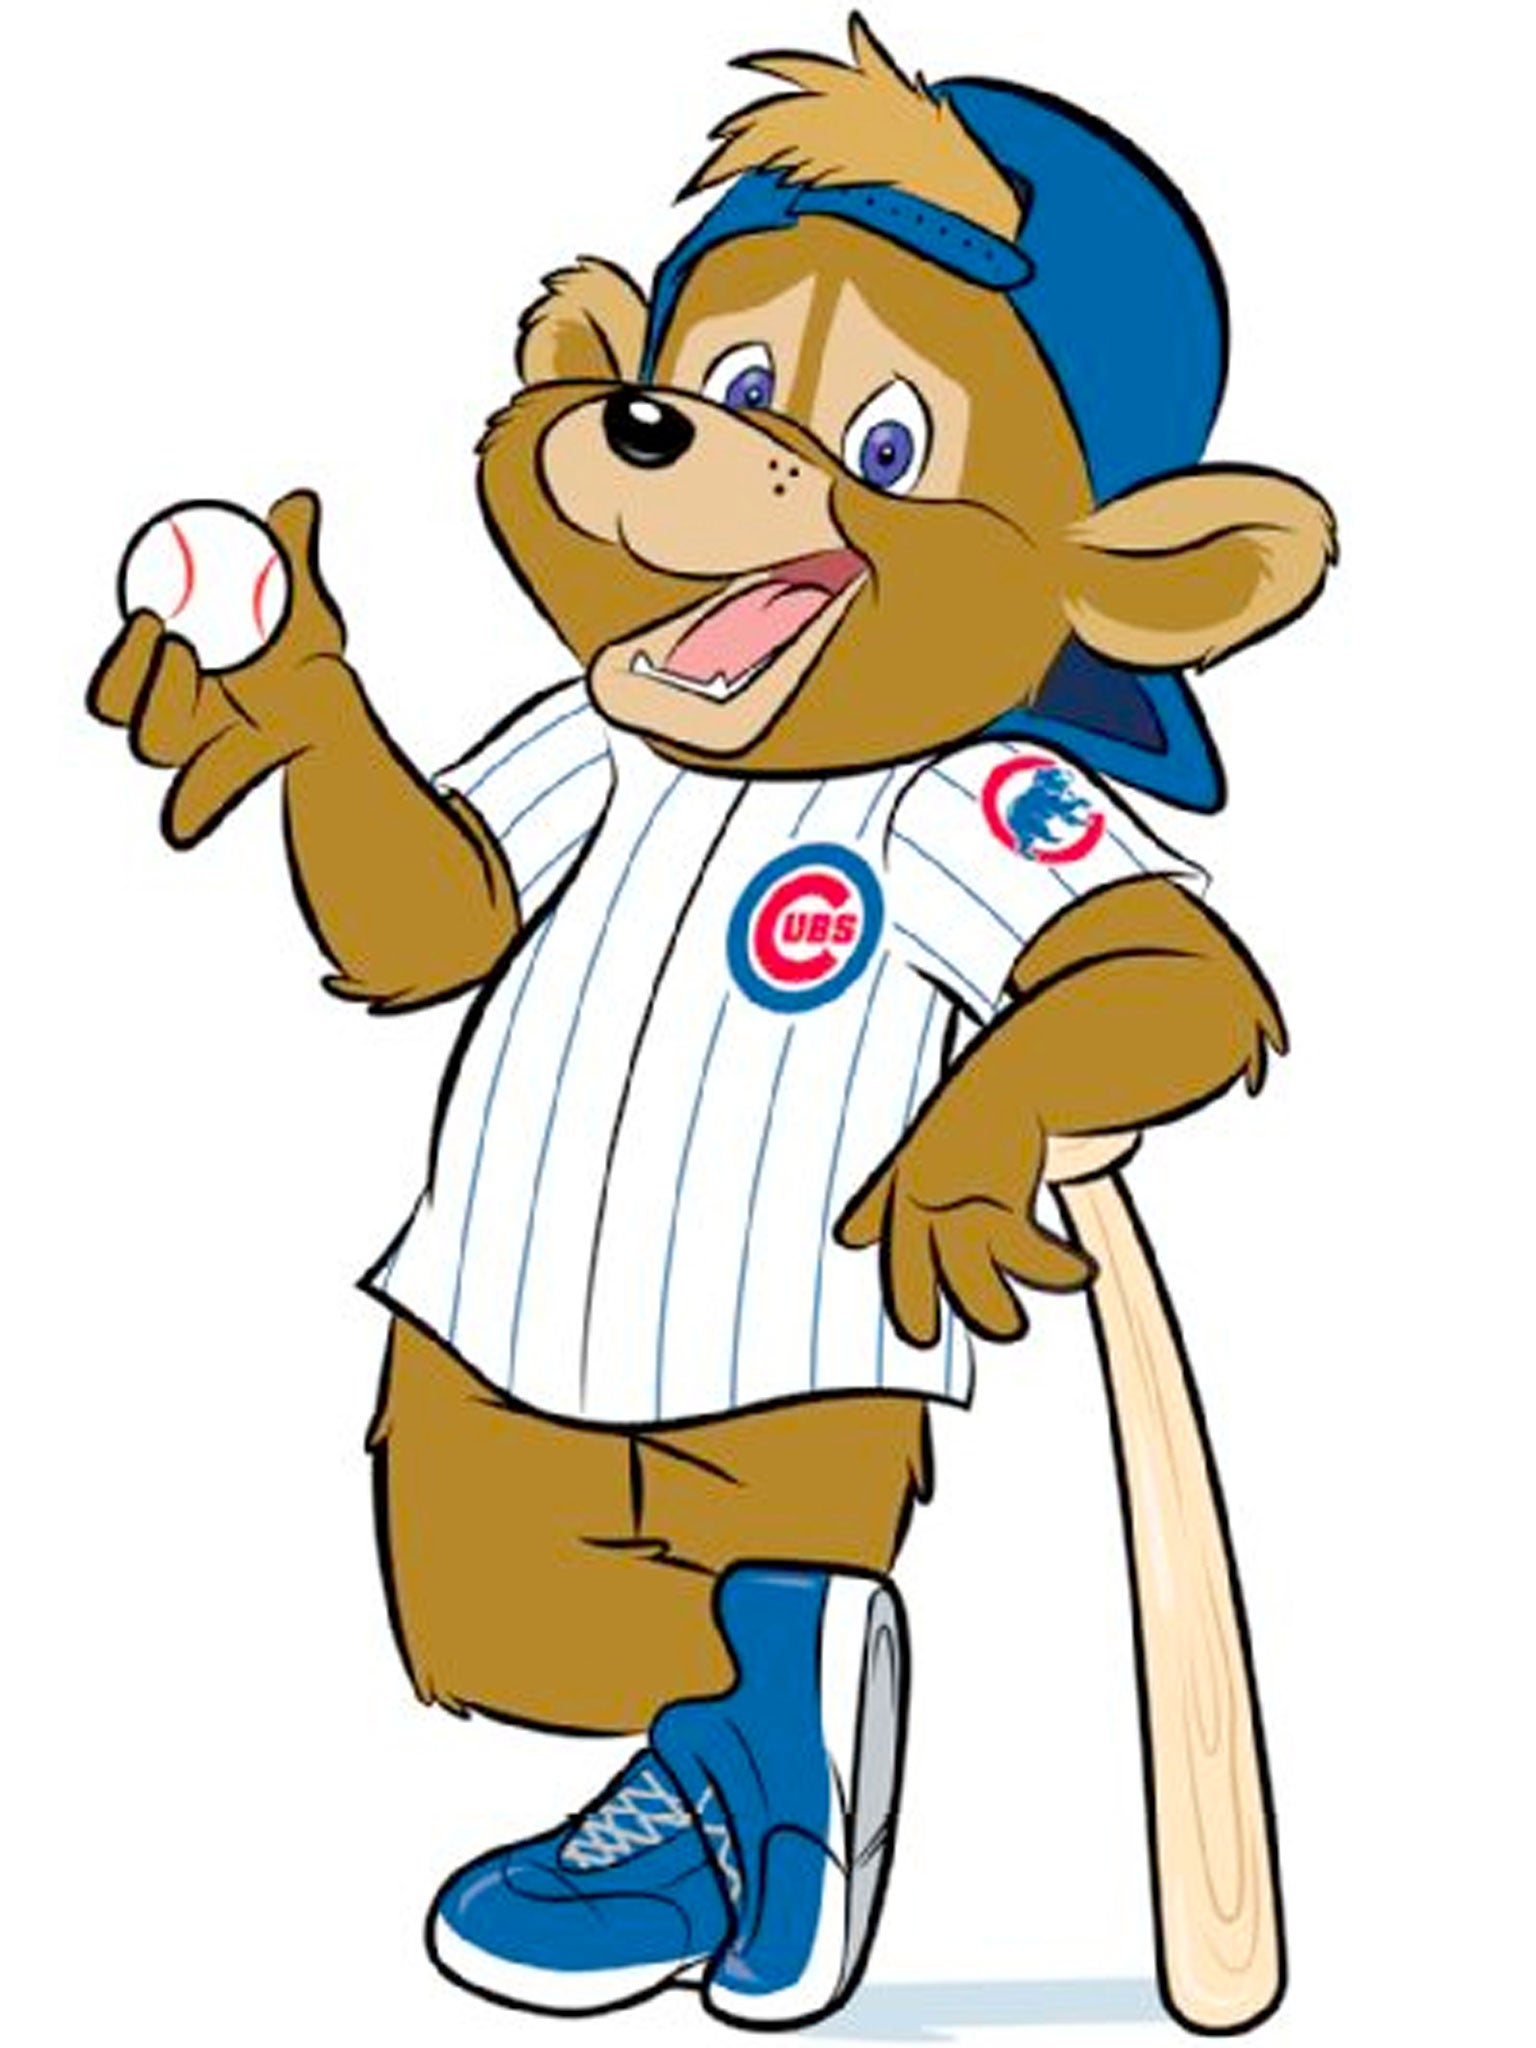 Clark the Cub 'pants-gate': US TV channel accidentally introduces